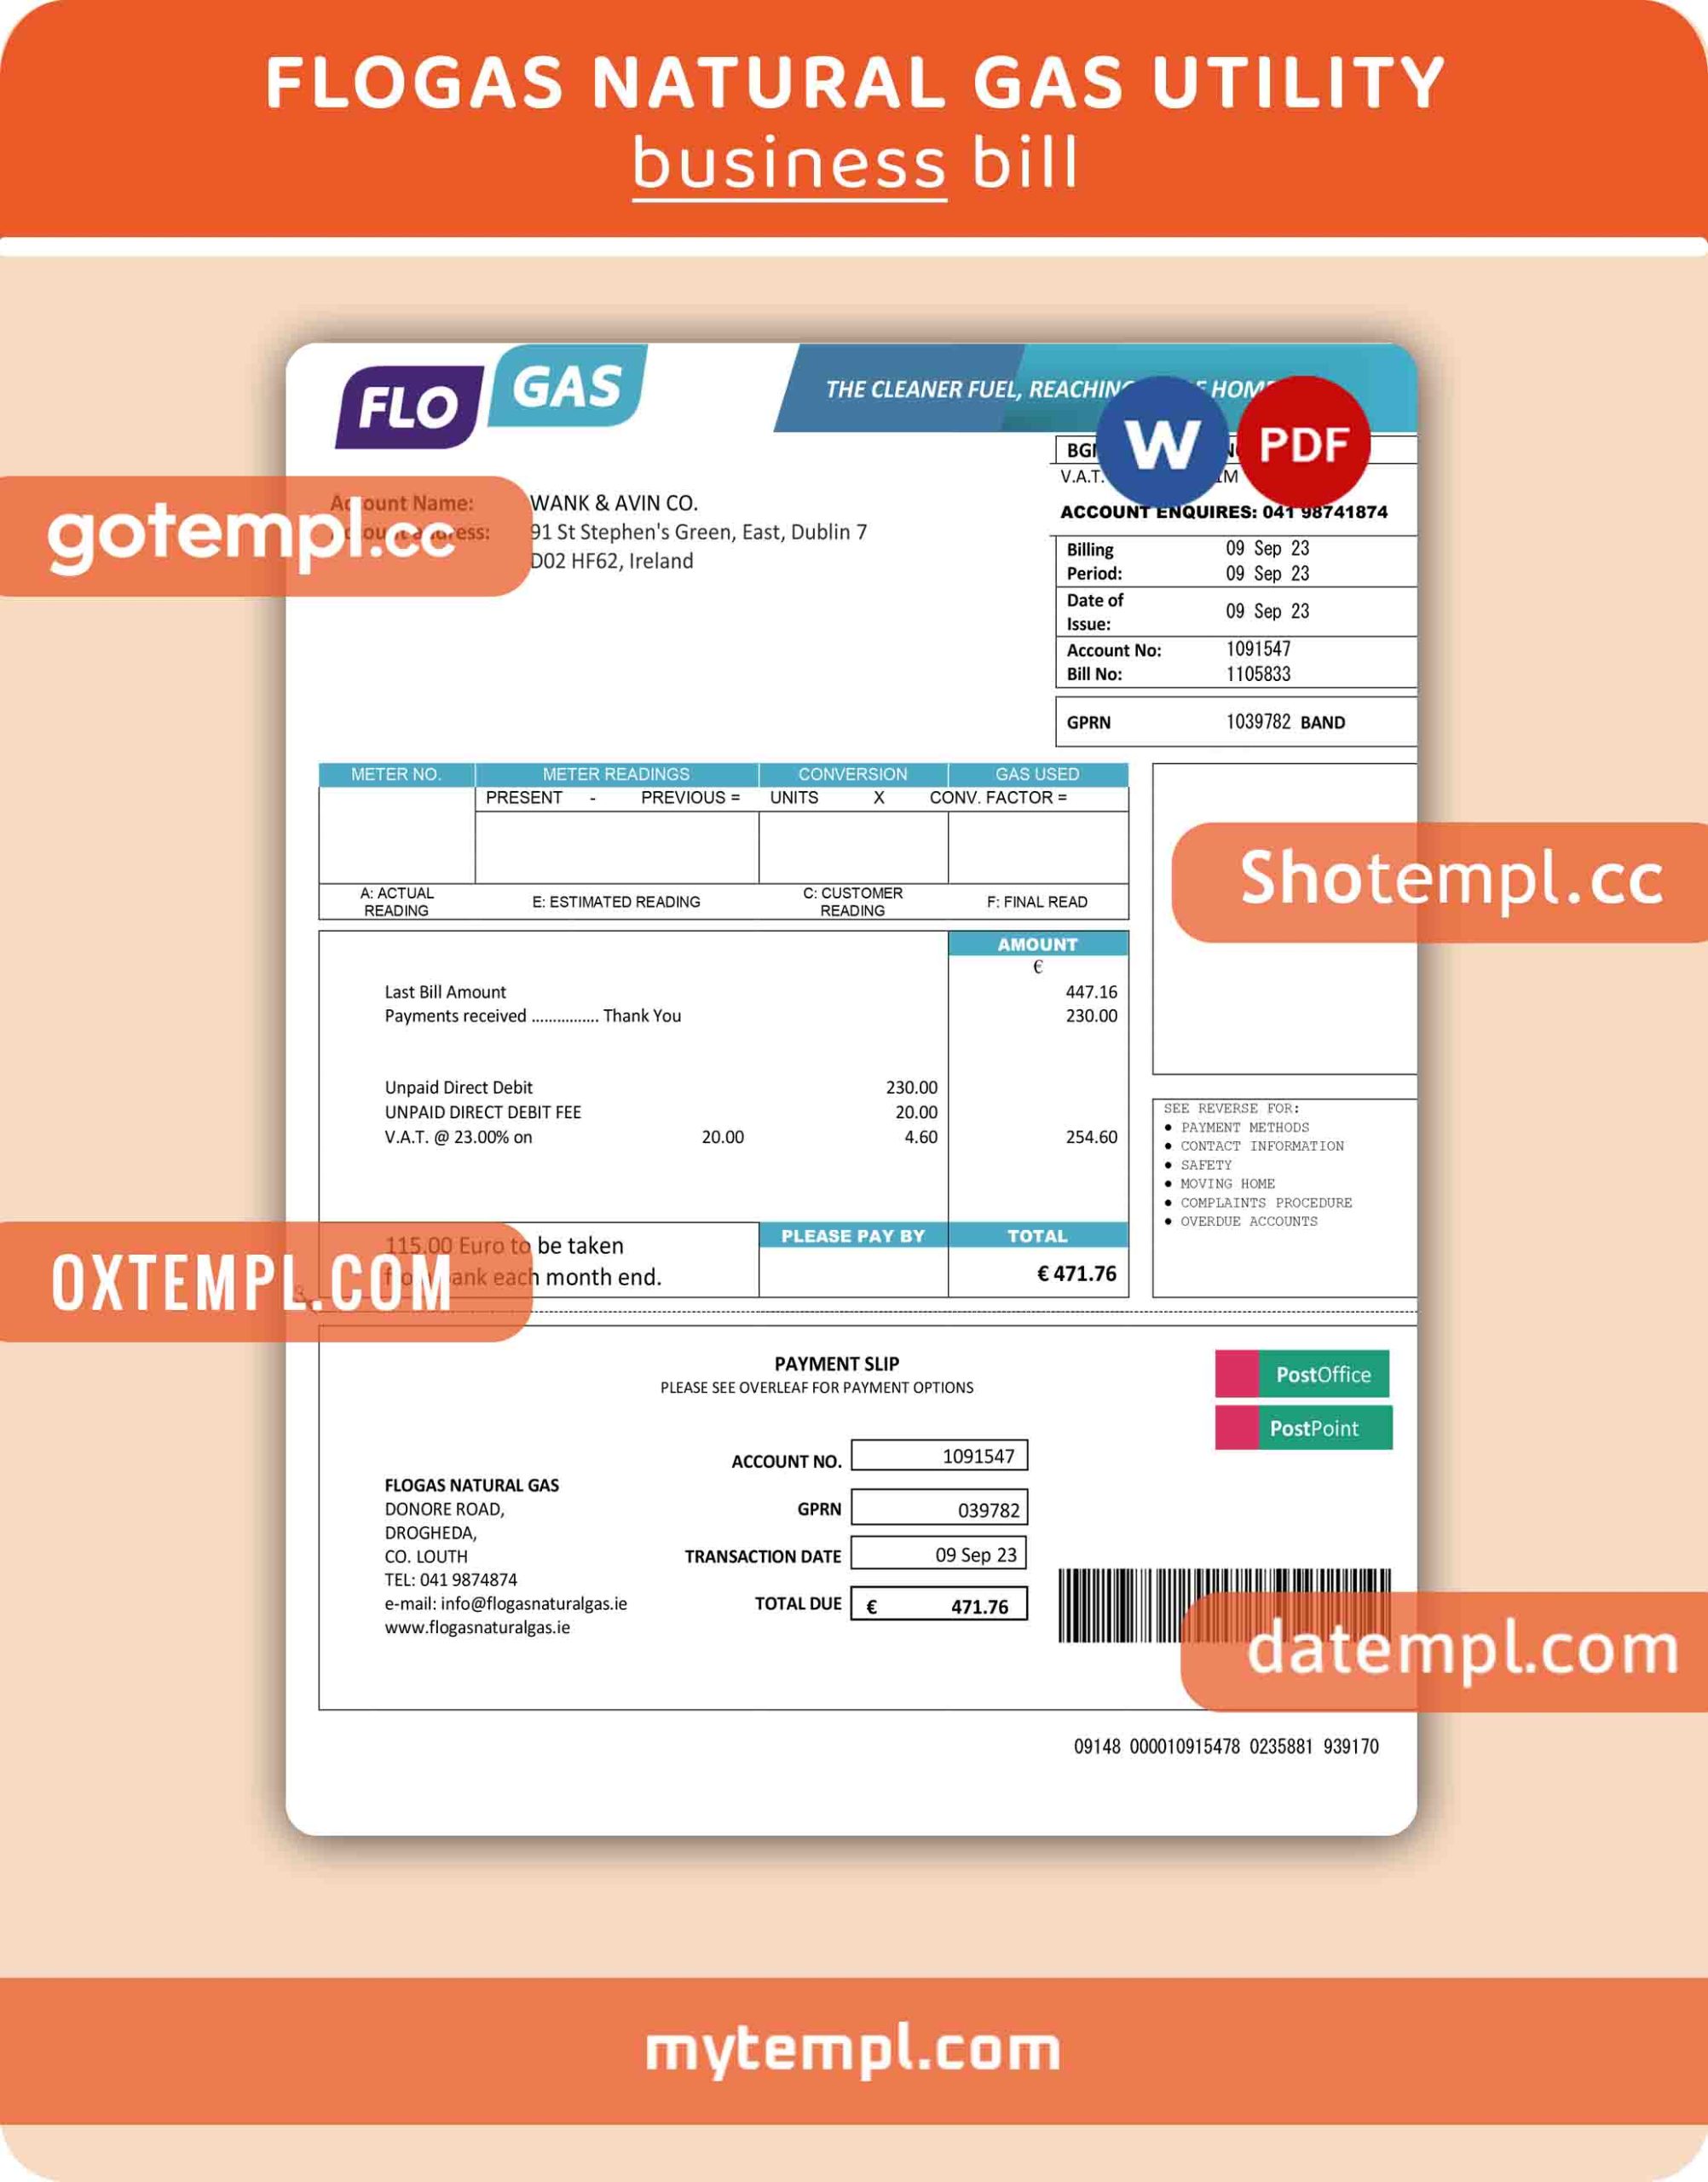 Flogas Natural Gas business utility bill, PDF and WORD template